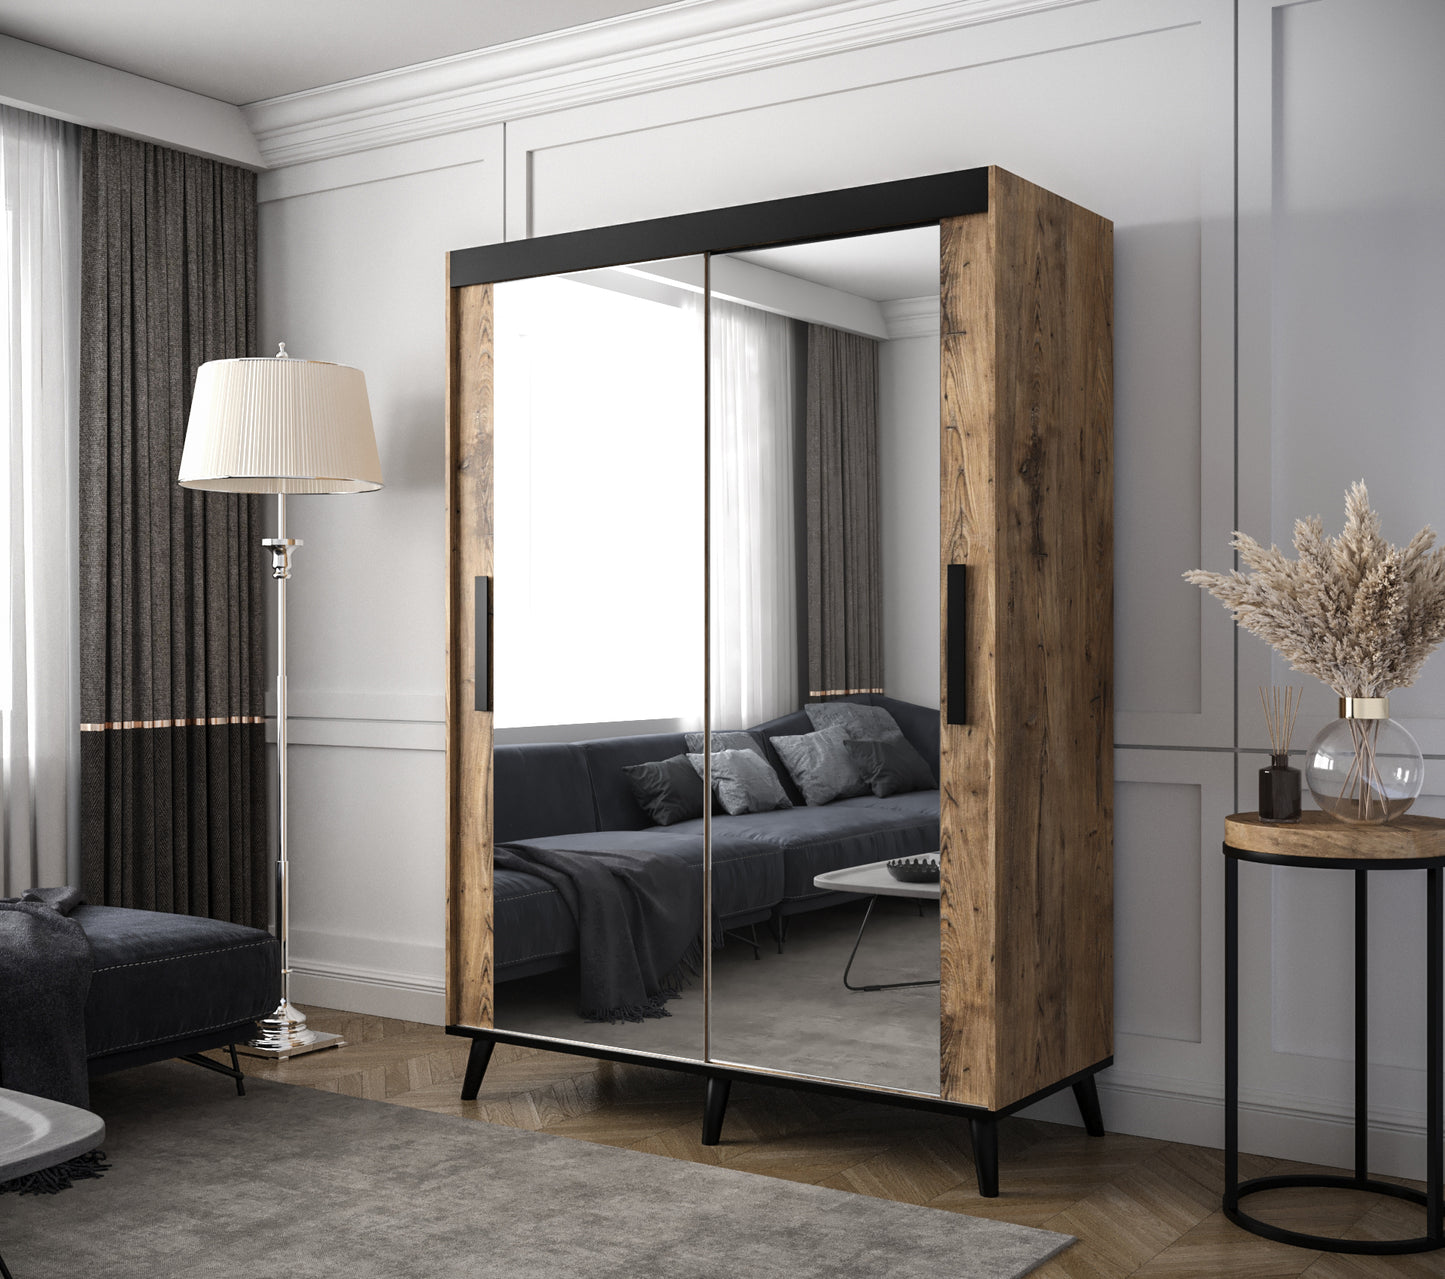 Galicia T3 - Industrial Style Wardrobe Mirrors Shelves Drawers Optional >150 cm x 208 cm<